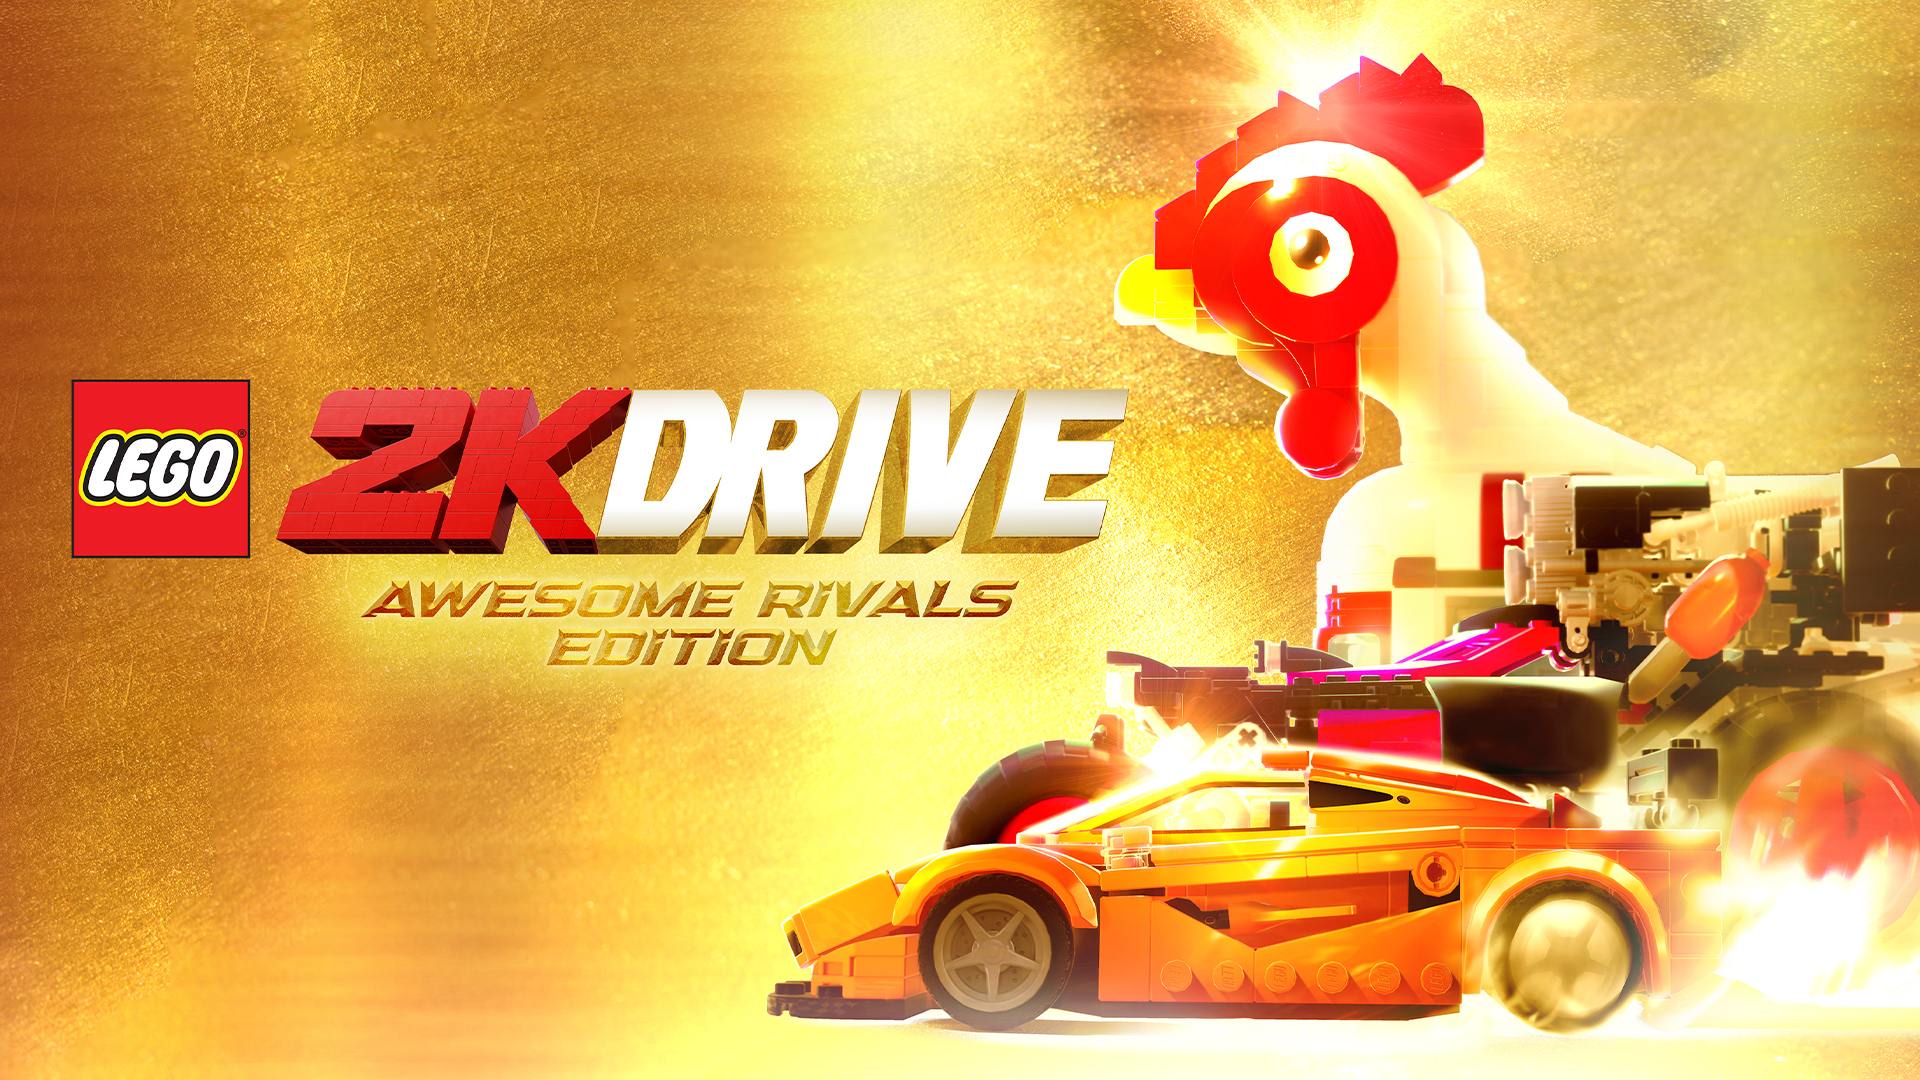 LEGO® 2K Drive Édition Awesome Rivals